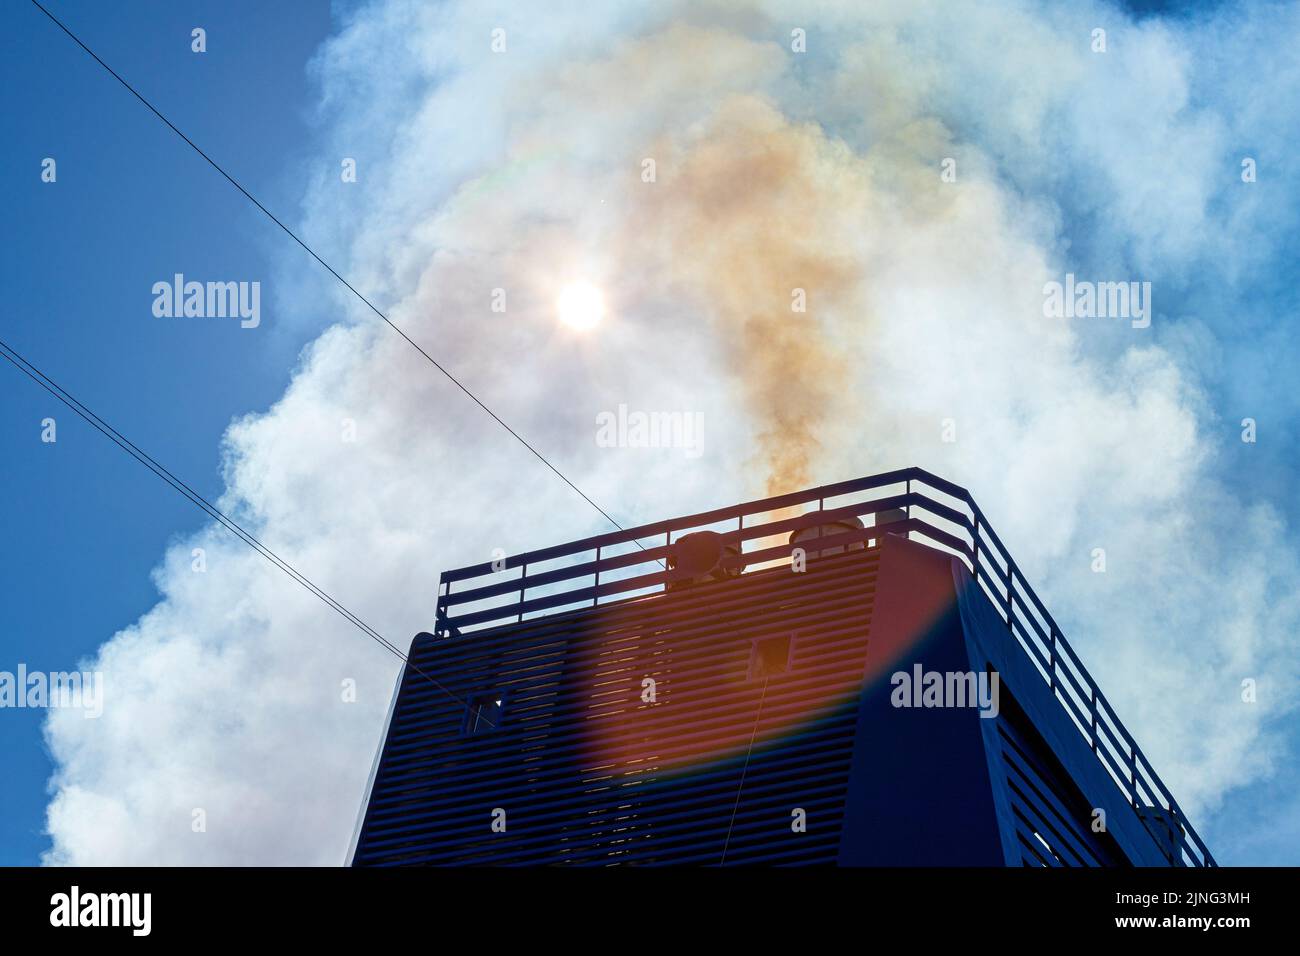 Smoky emissions from the exhaust pipes in the funnel of a large cruise ship Stock Photo